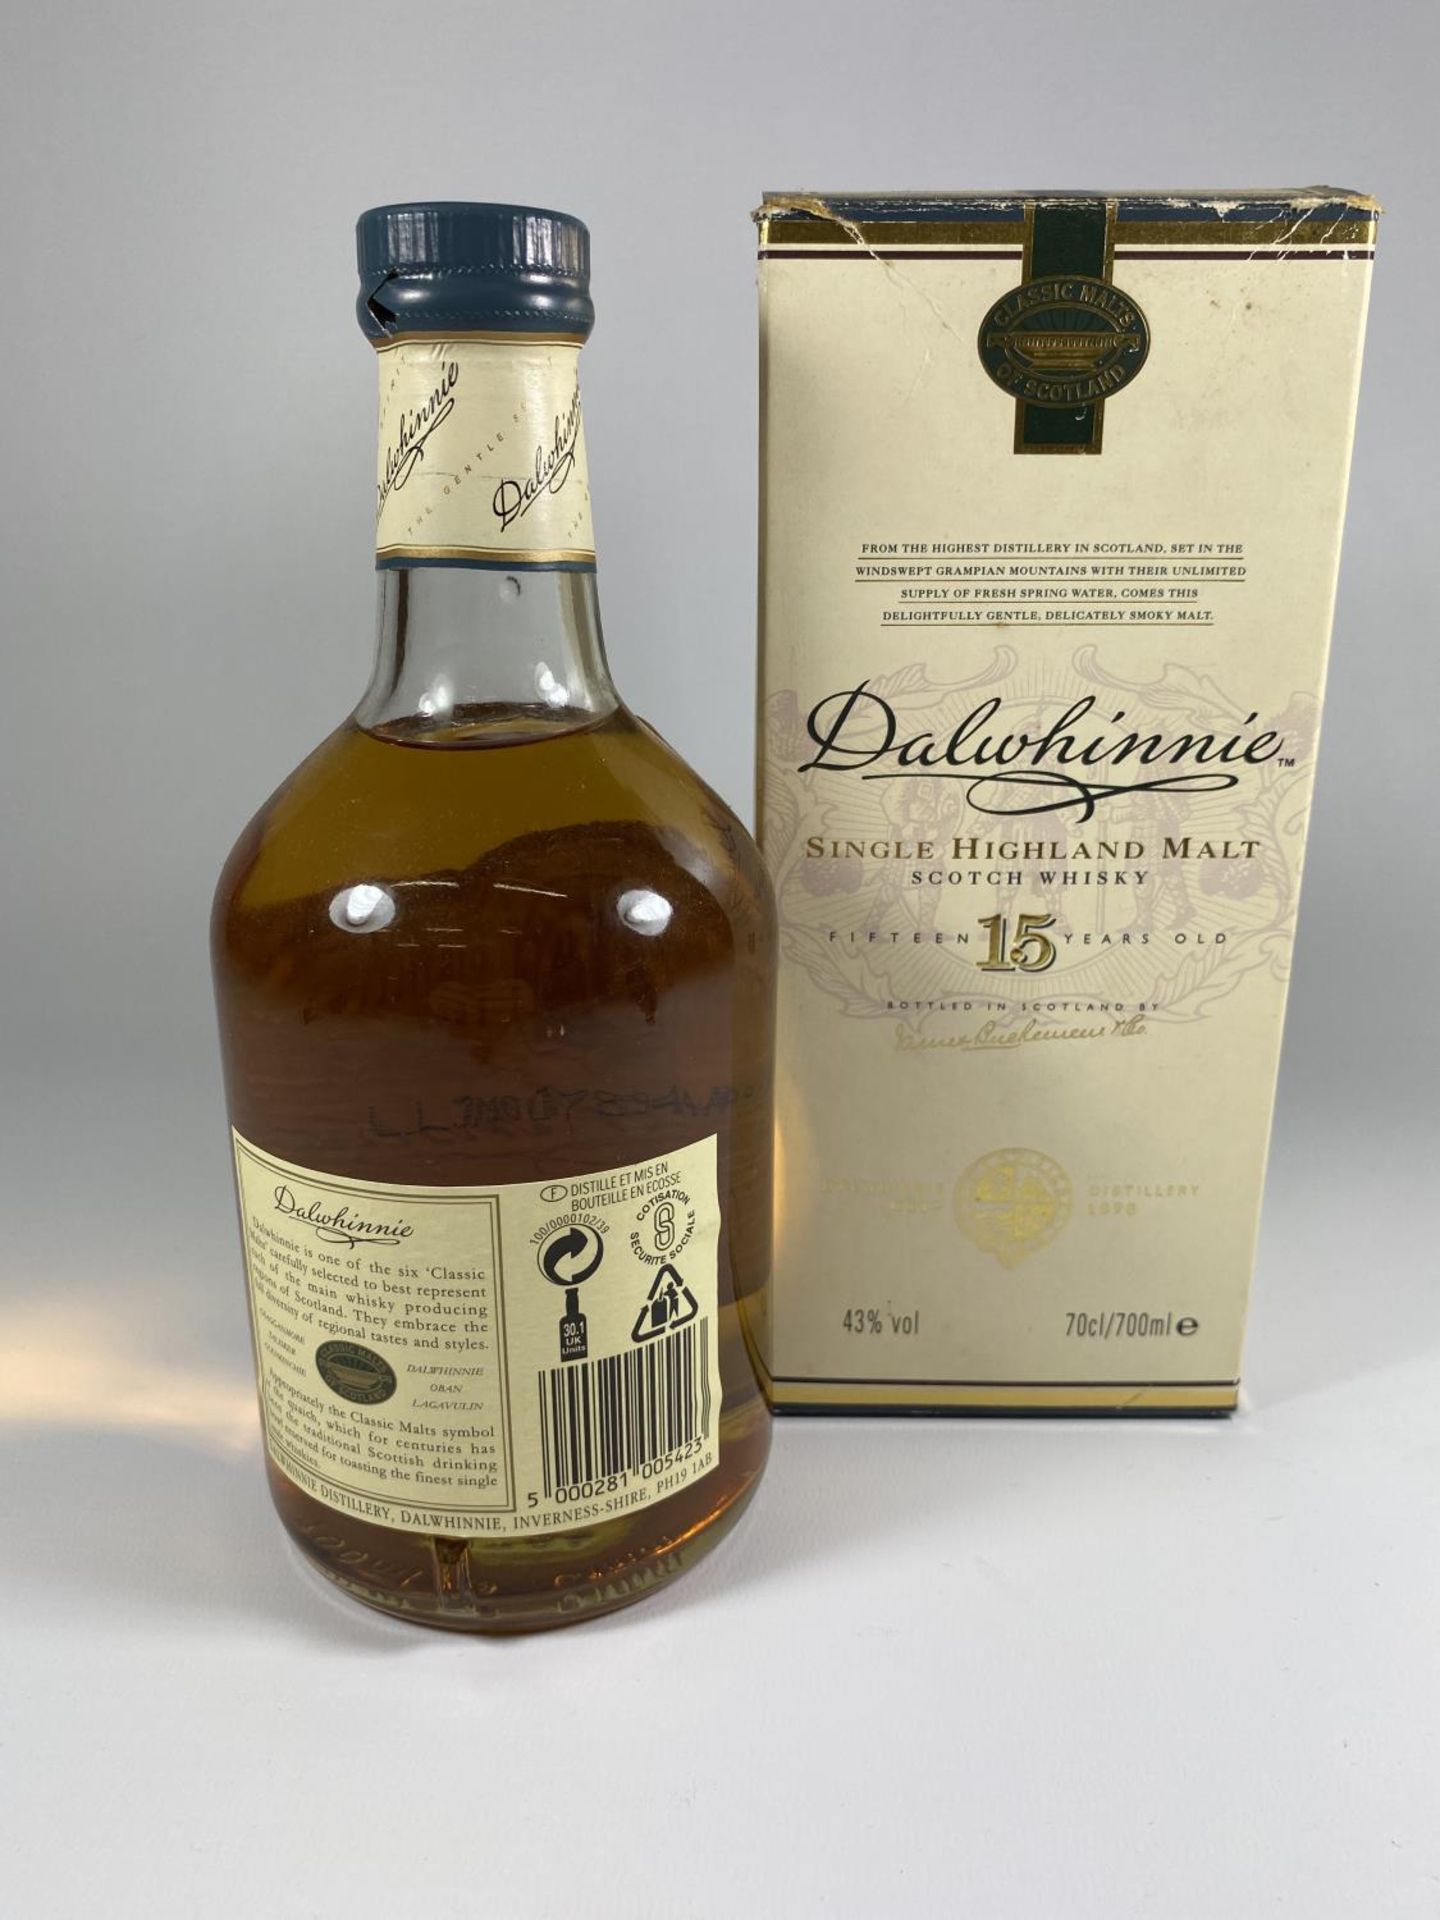 1 X 70CL BOXED BOTTLE - DALWHINNIE 15 YEAR OLD SINGLE HIGHLAND MALT WHISKY - Image 3 of 3